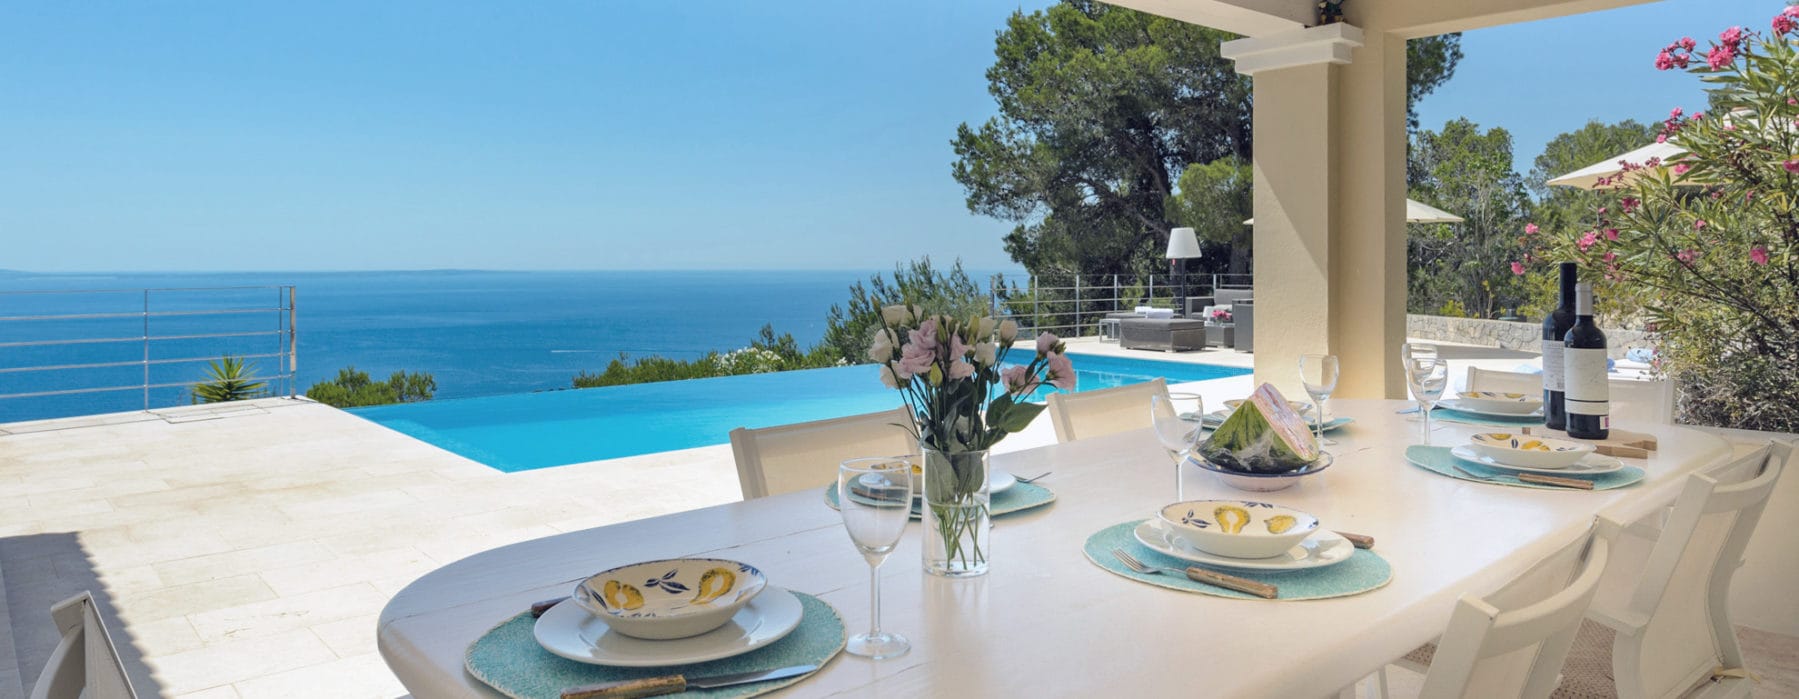 Roofed outdoor dining area with laid white table and white chairs in front of the pool with sea views